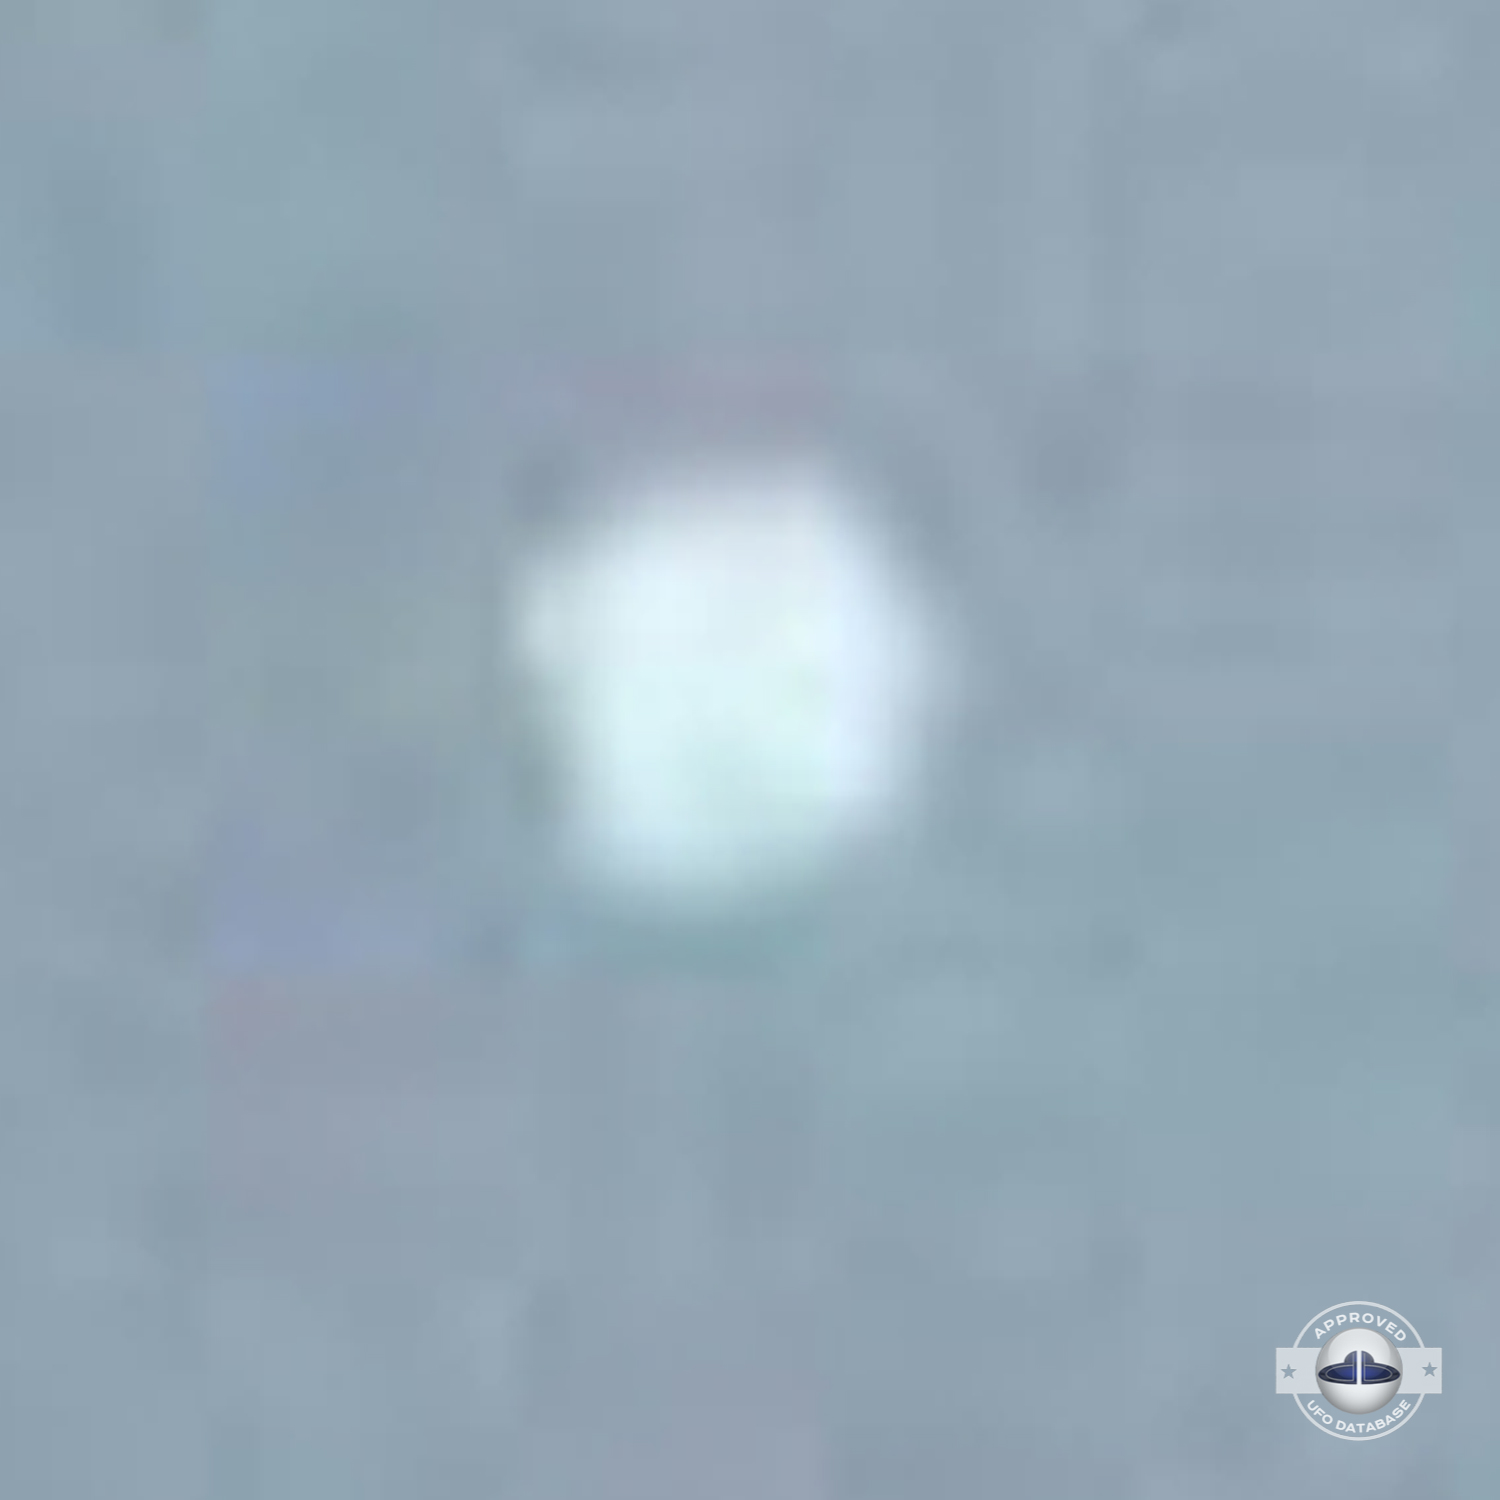 UFO passing over unknown body of water somewhere in Turkey | May 2003 UFO Picture #173-6